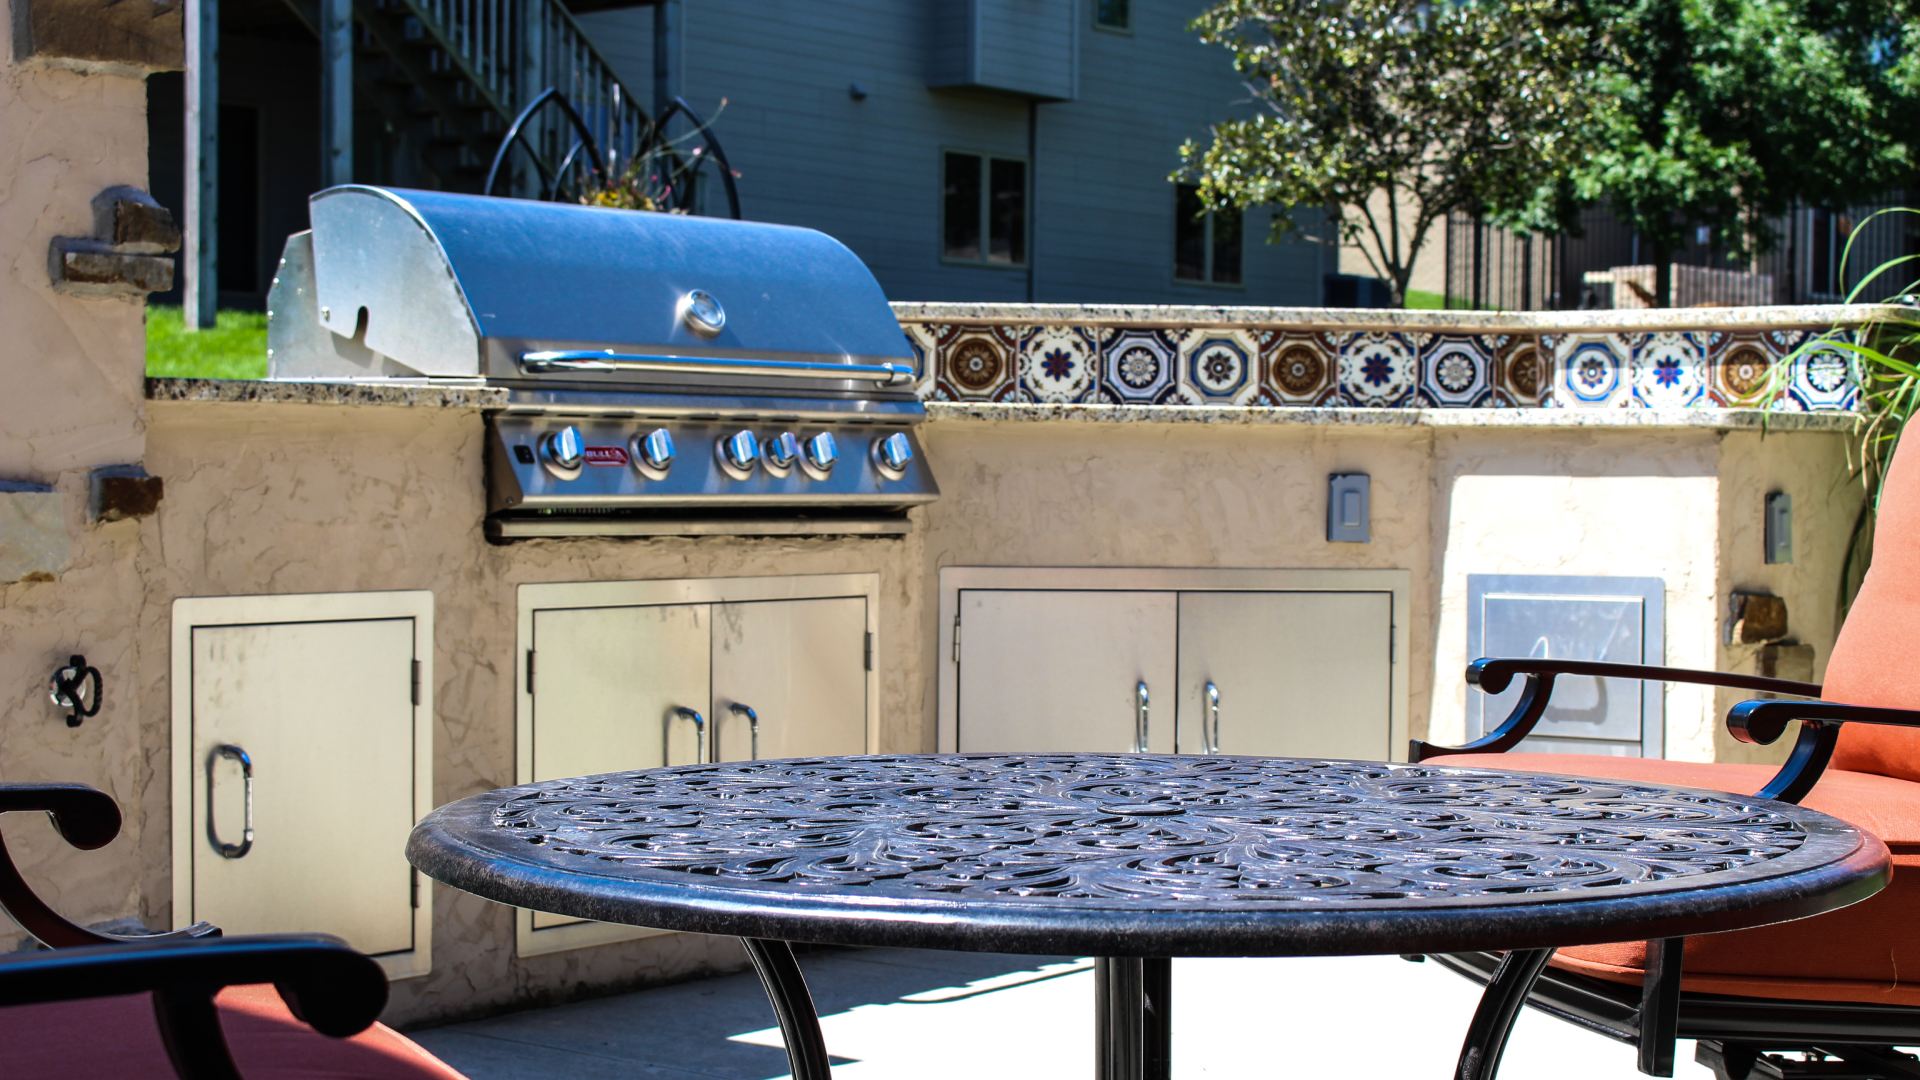 4 Amazing Amenities You Need to Add to Your Outdoor Kitchen Design